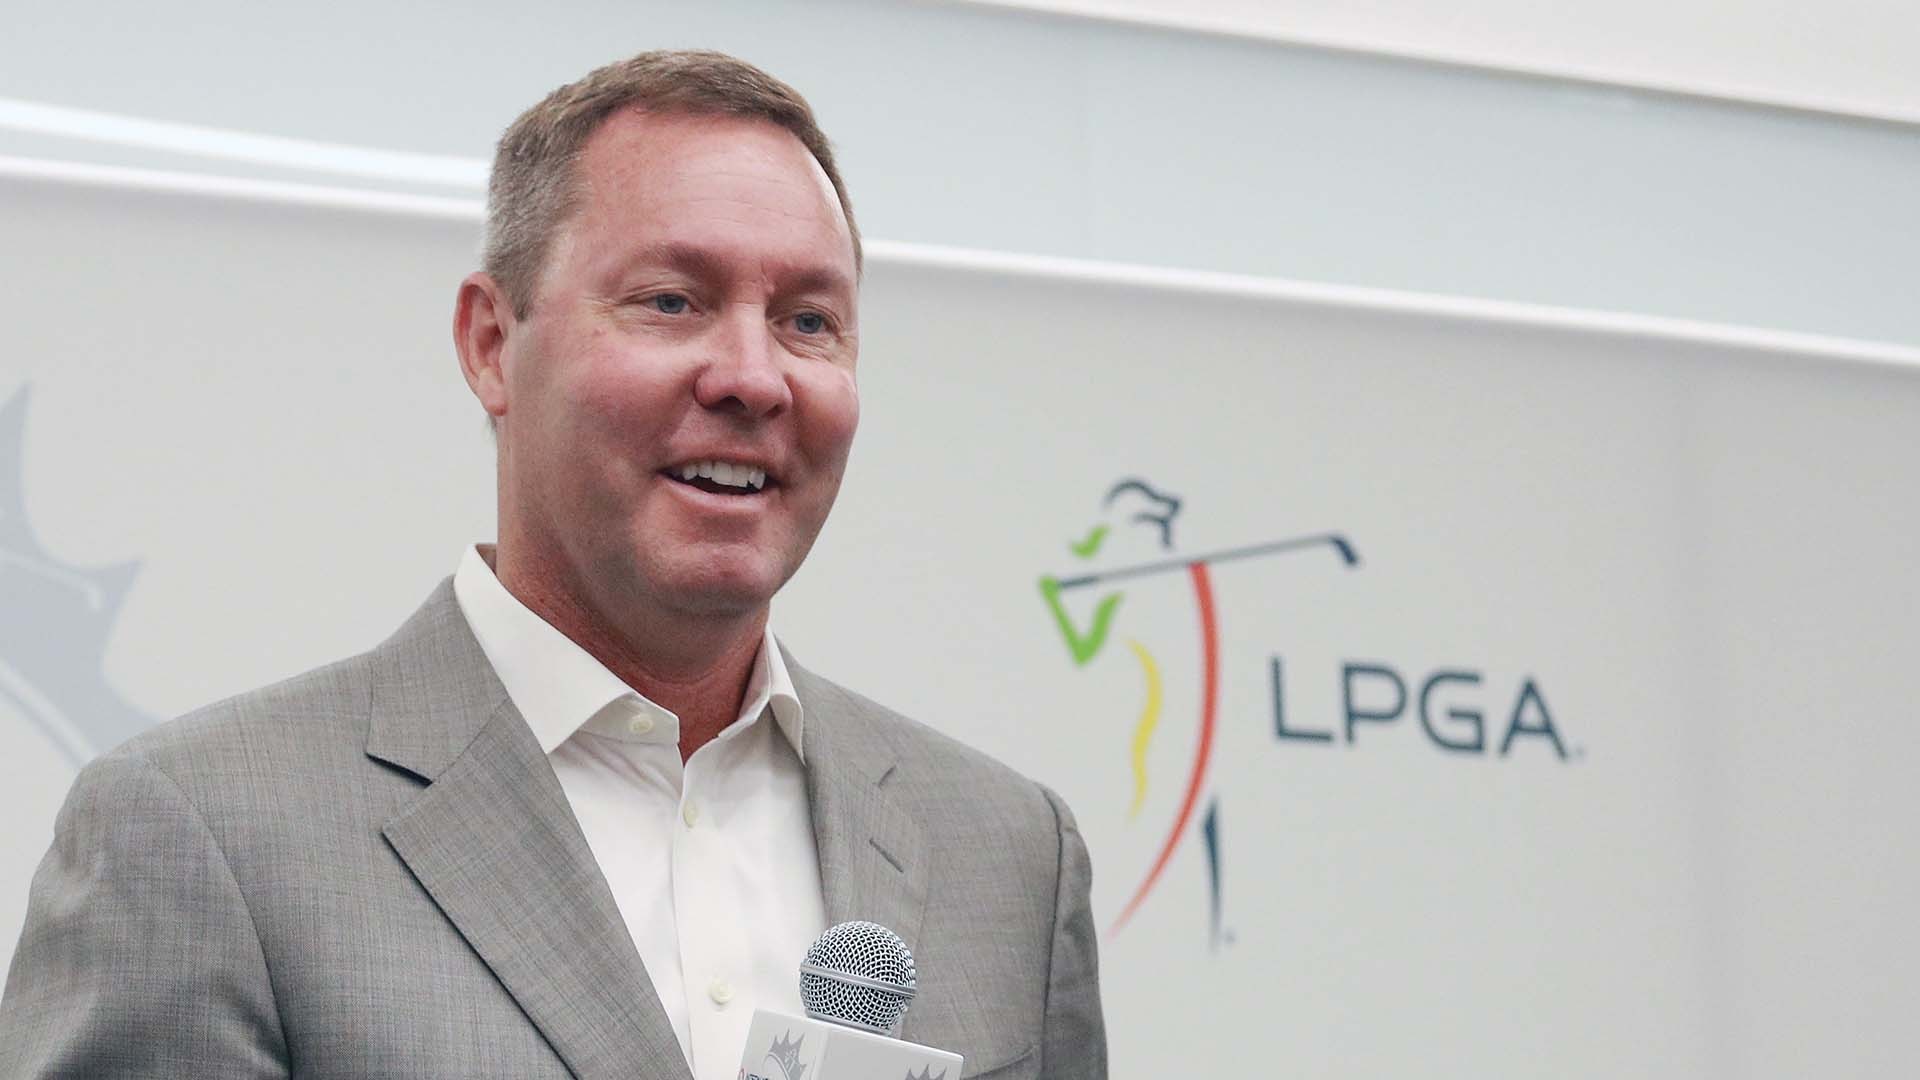 LPGA looks to test players for COVID-19 at every event